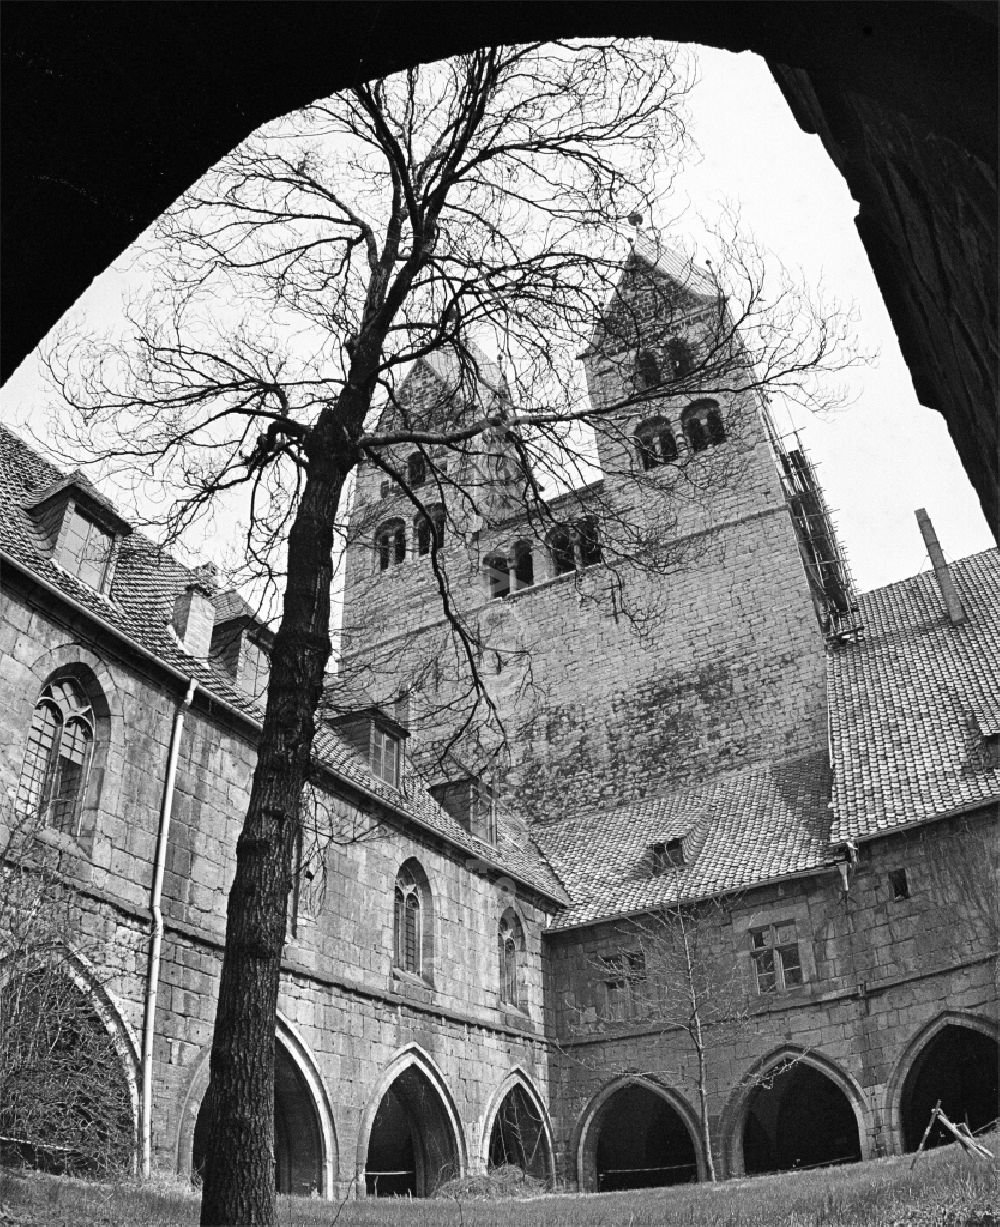 GDR photo archive: Halberstadt - Facade and roof structure of the sacral building of the church the south side of the cloister in Halberstadt in the state Saxony-Anhalt on the territory of the former GDR, German Democratic Republic